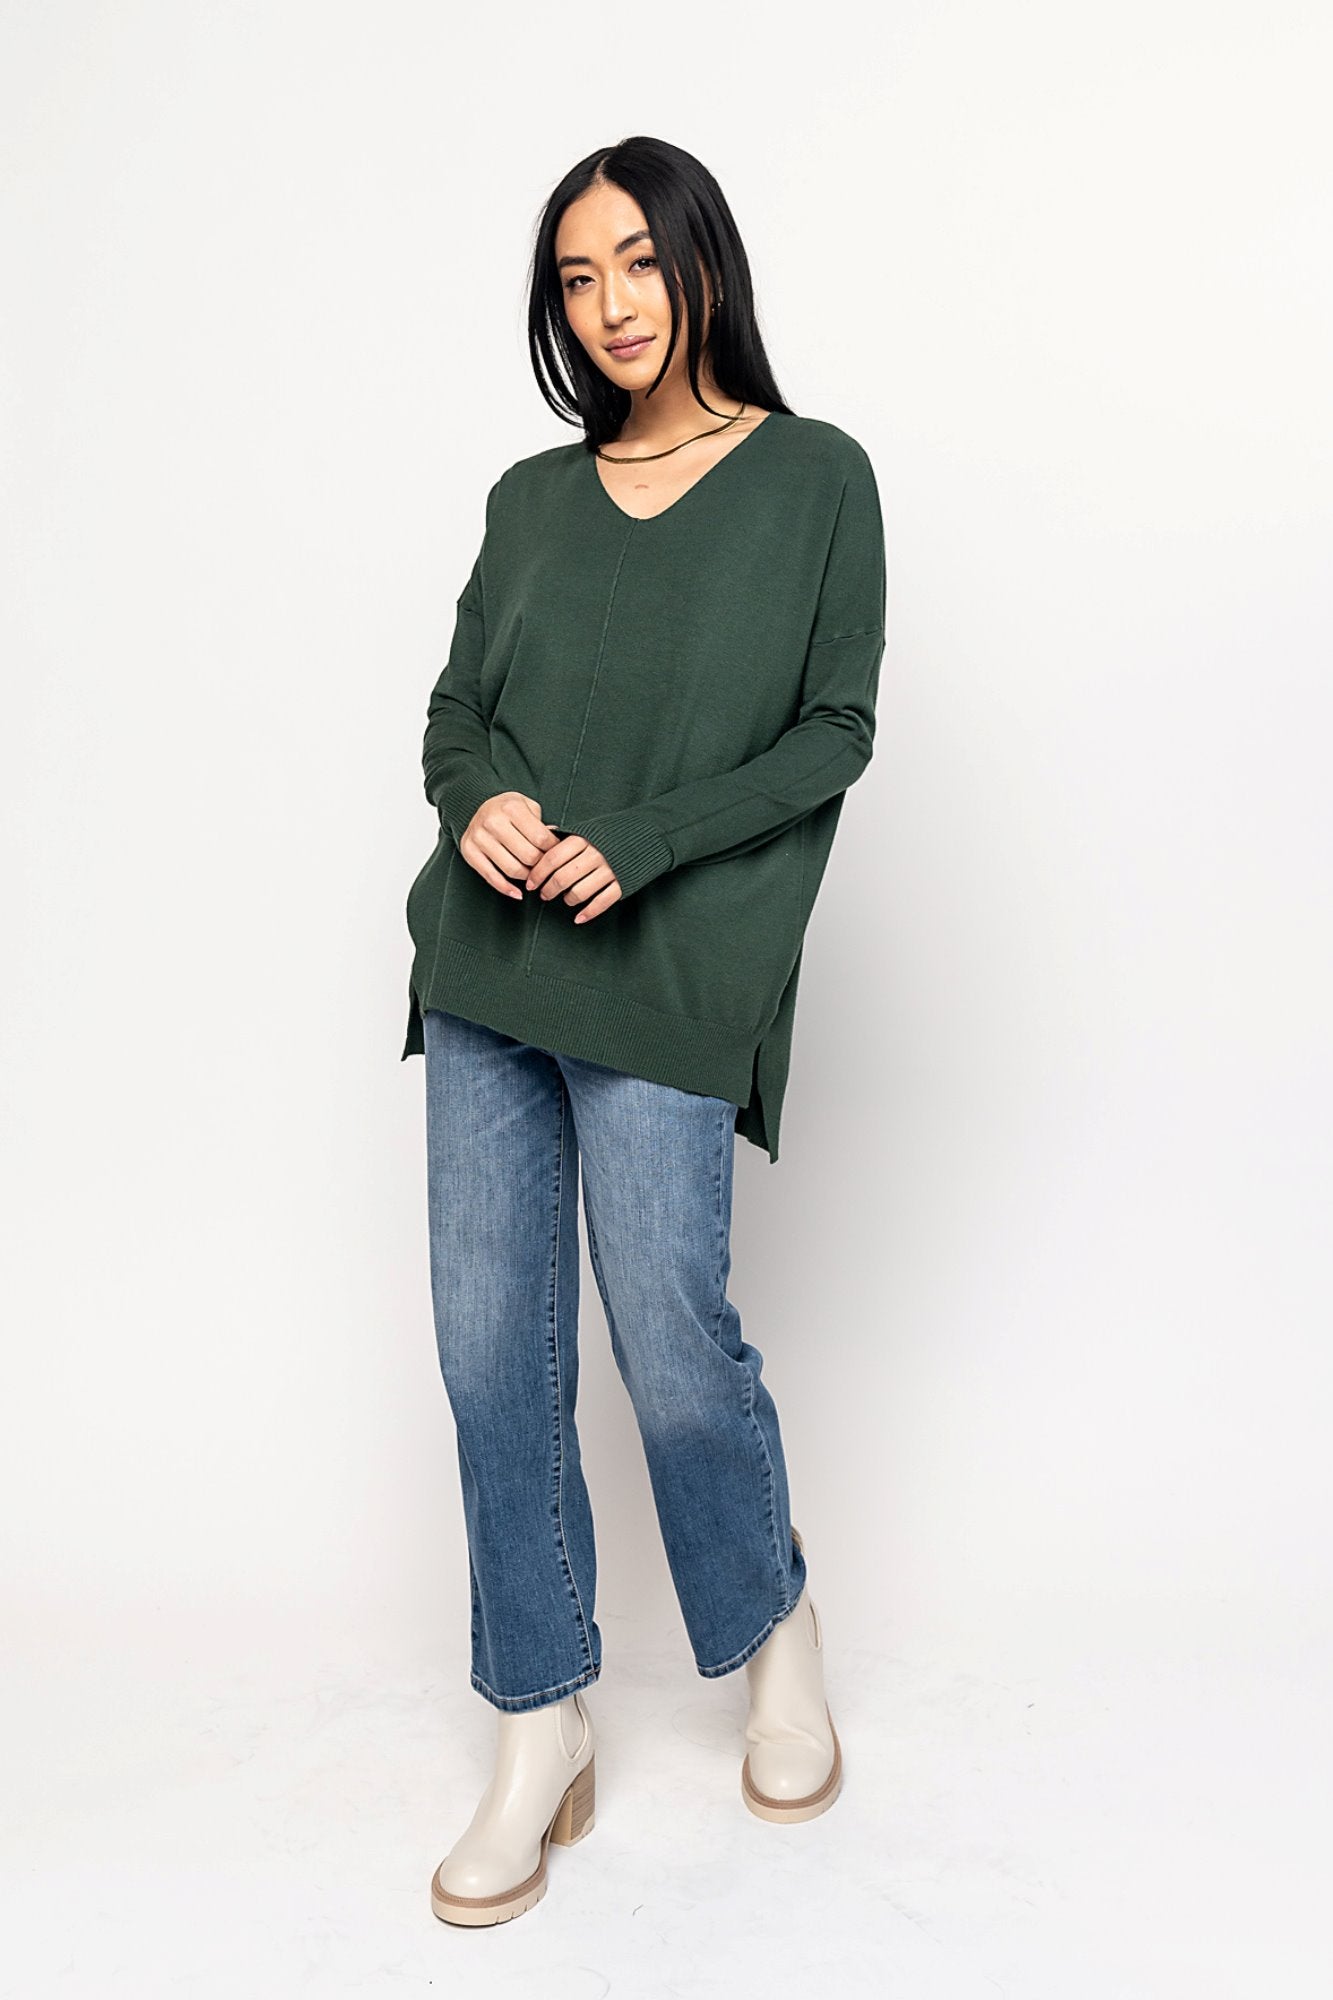 Quinn Sweater in Forest Holley Girl 